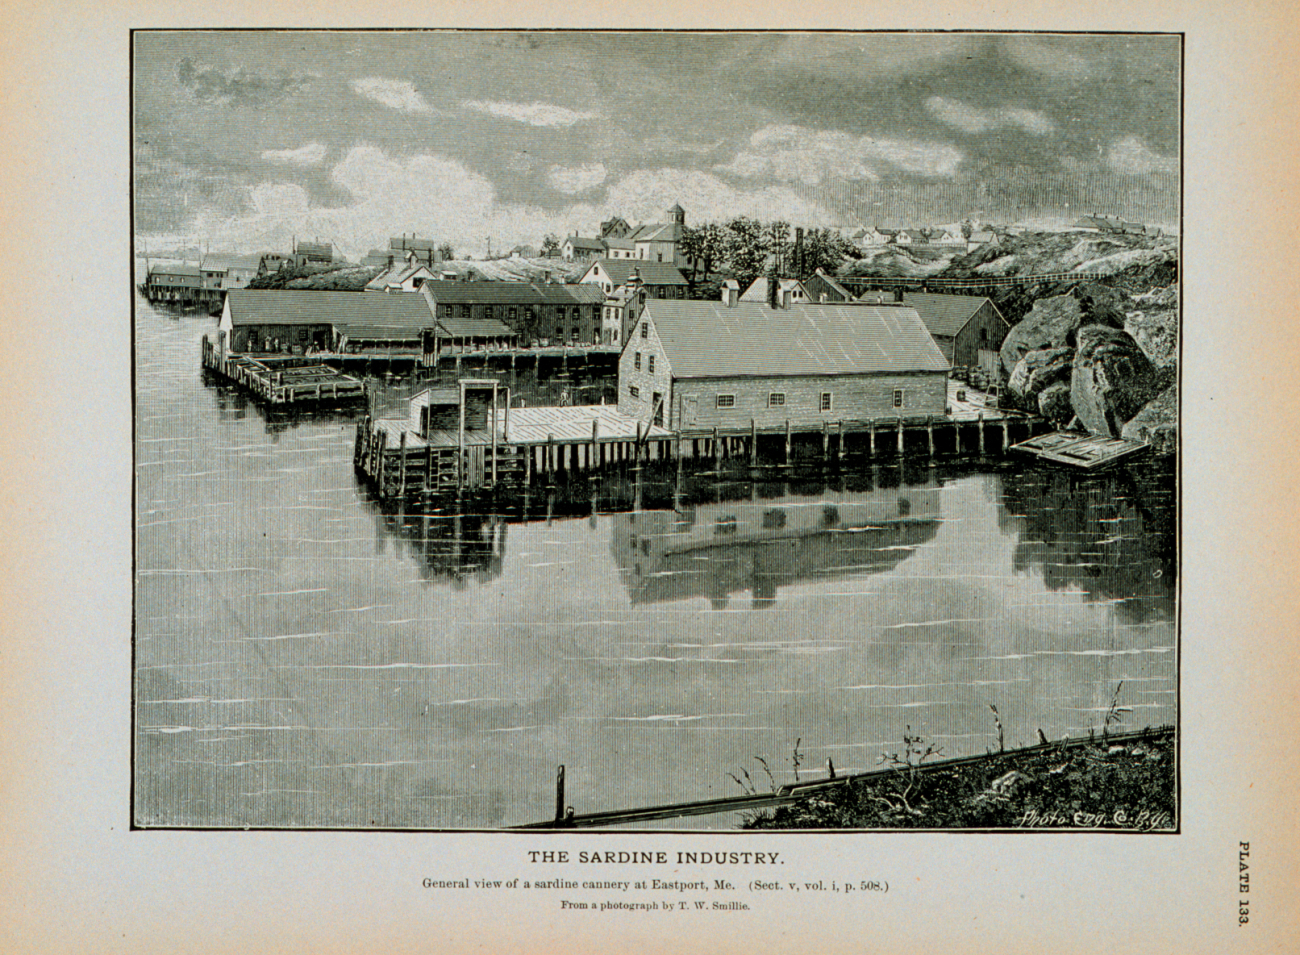 General view of sardine cannery at Eastport, MaineFrom a photograph by T